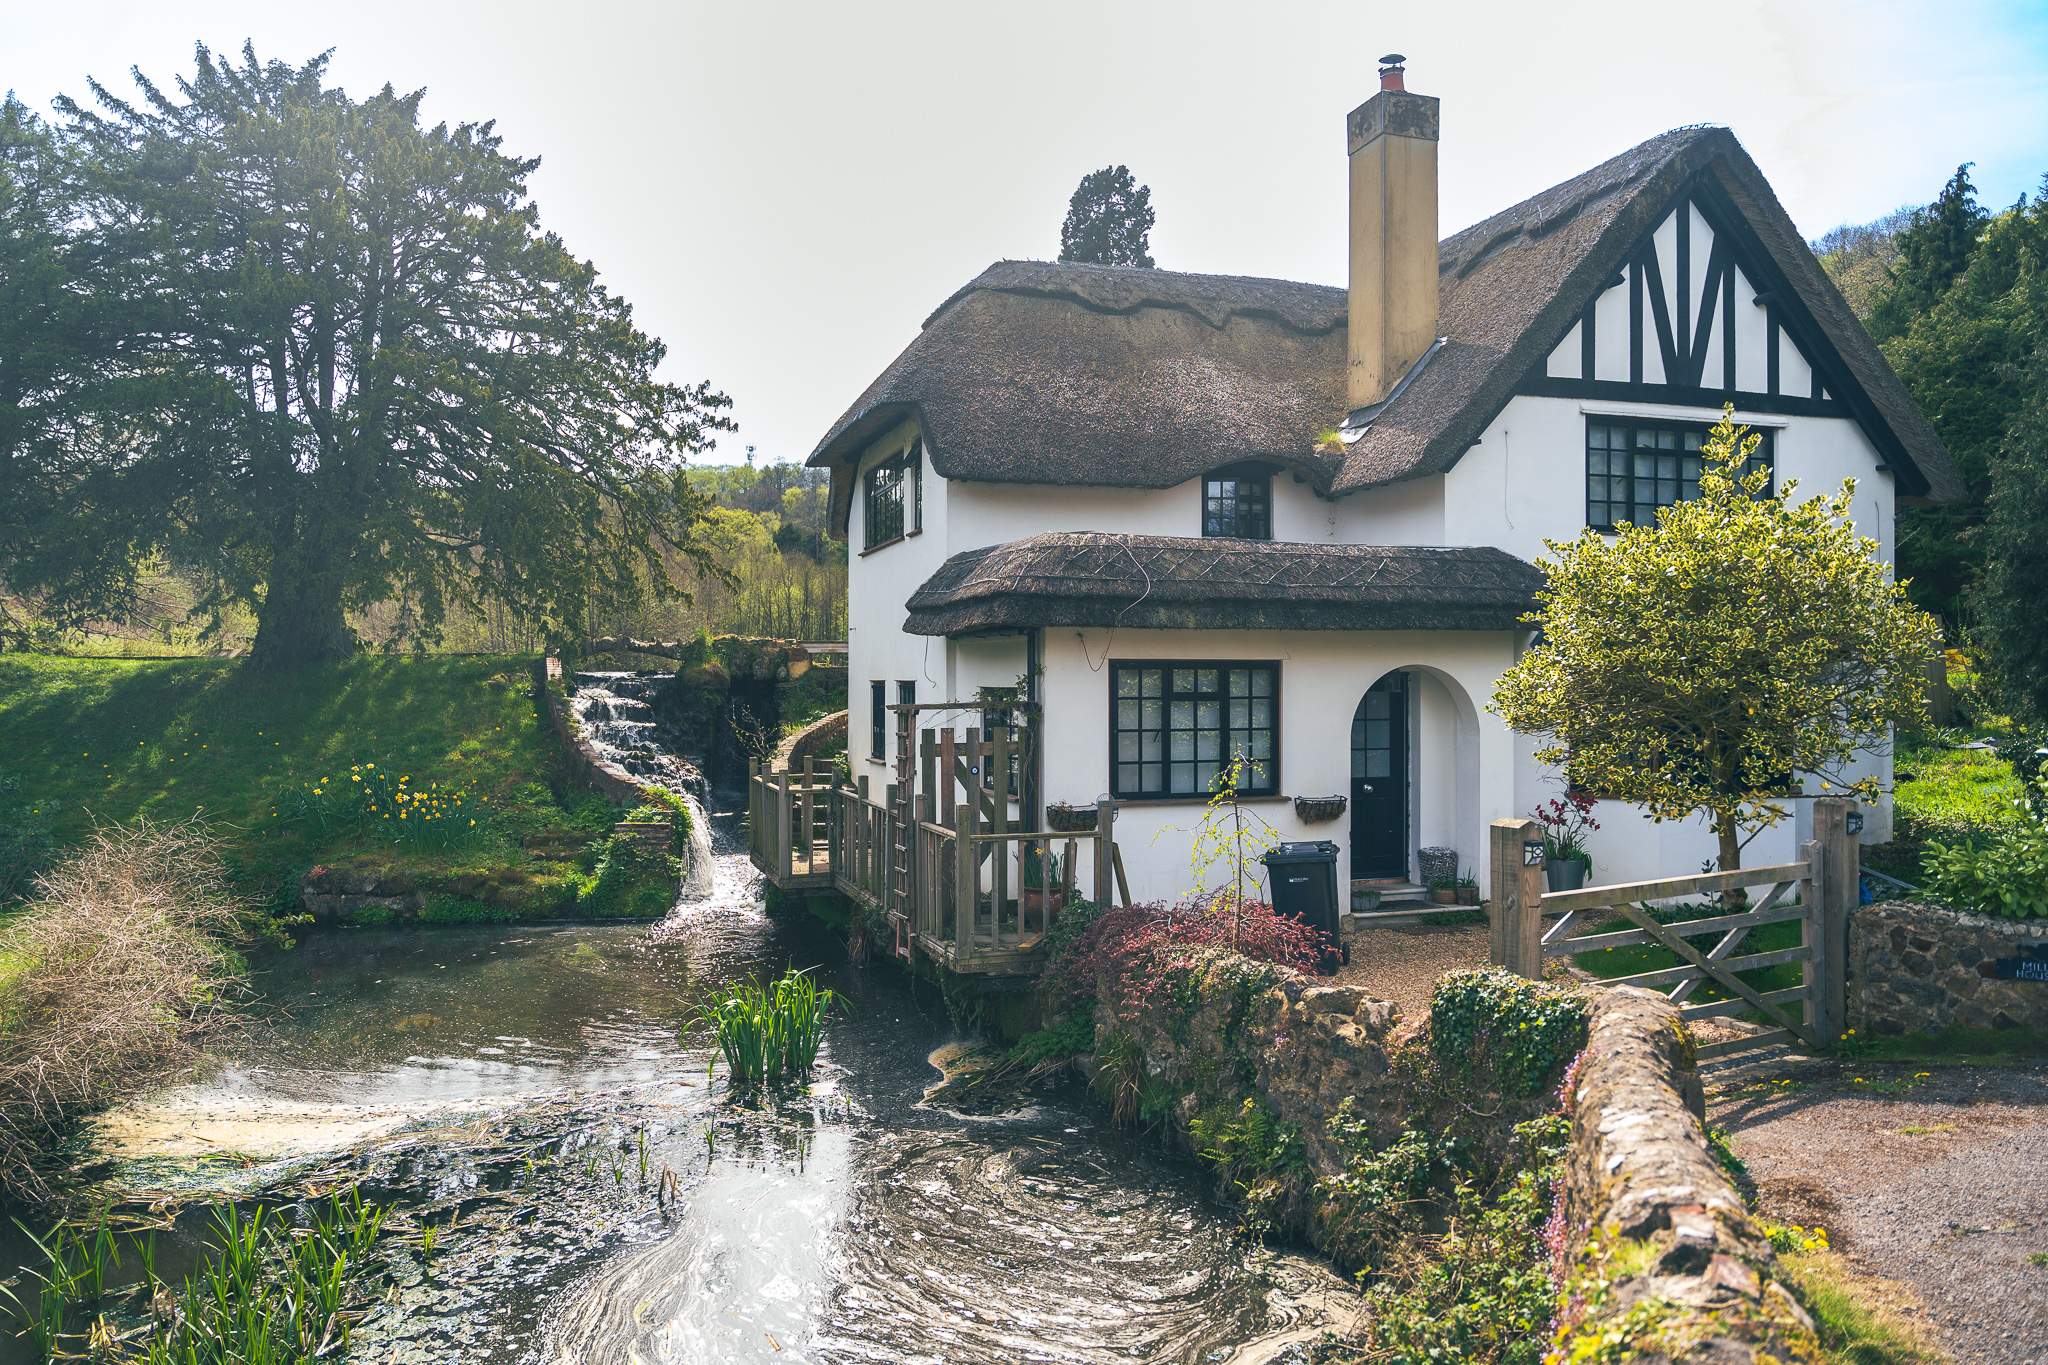 The Old Mill House, Westcott, Surrey - (note, we passed the mill house much later on the route)